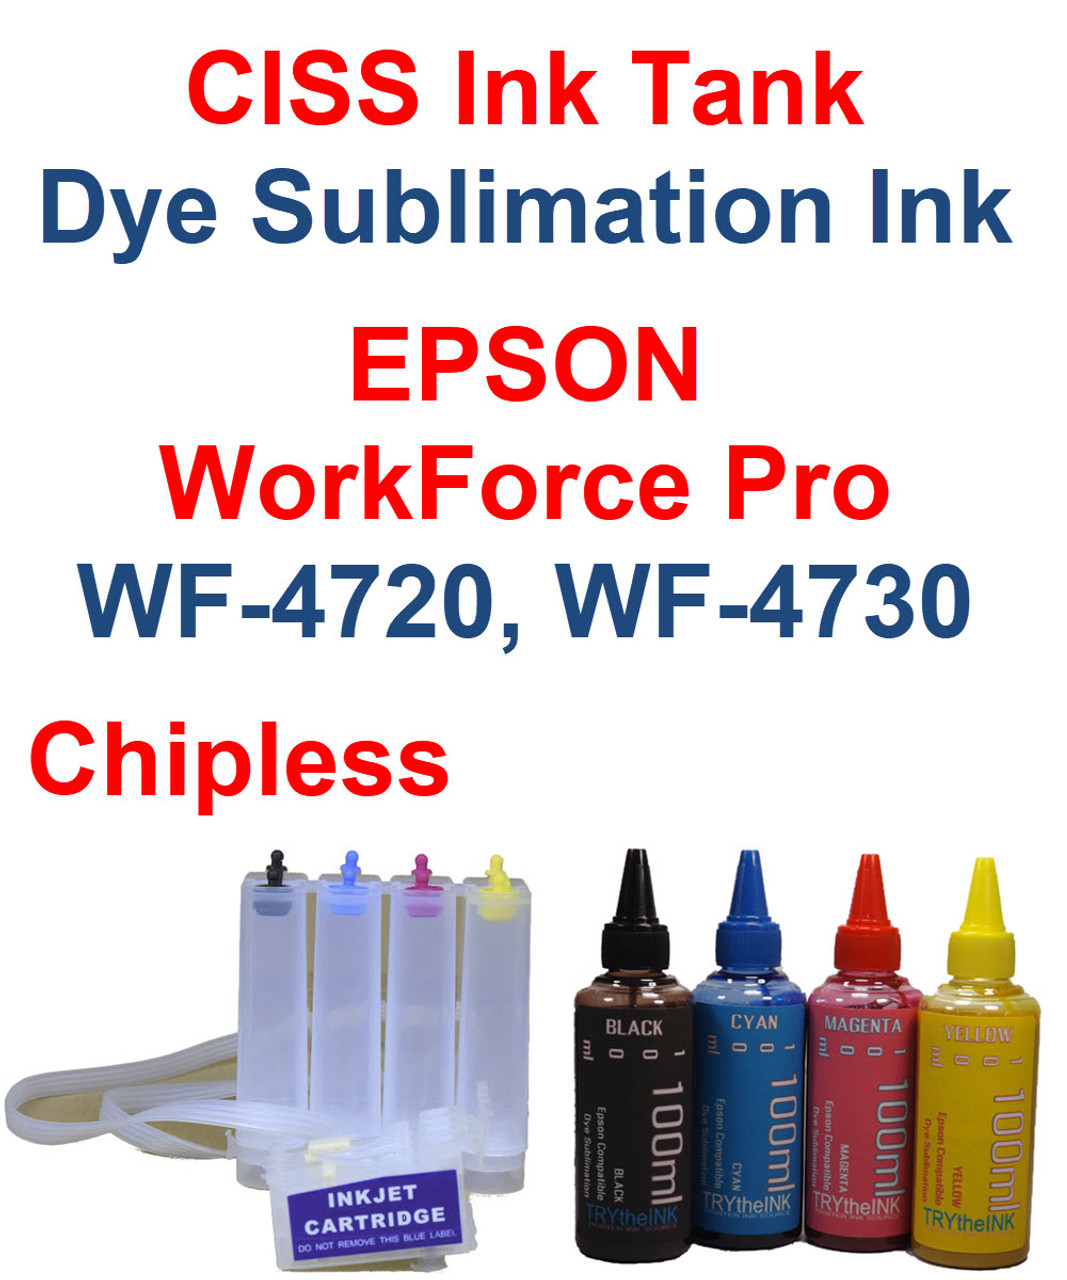 Ciss Chipless Ink Tank For Epson Workforce Pro Wf 4720 Wf 4730 Printers 1238